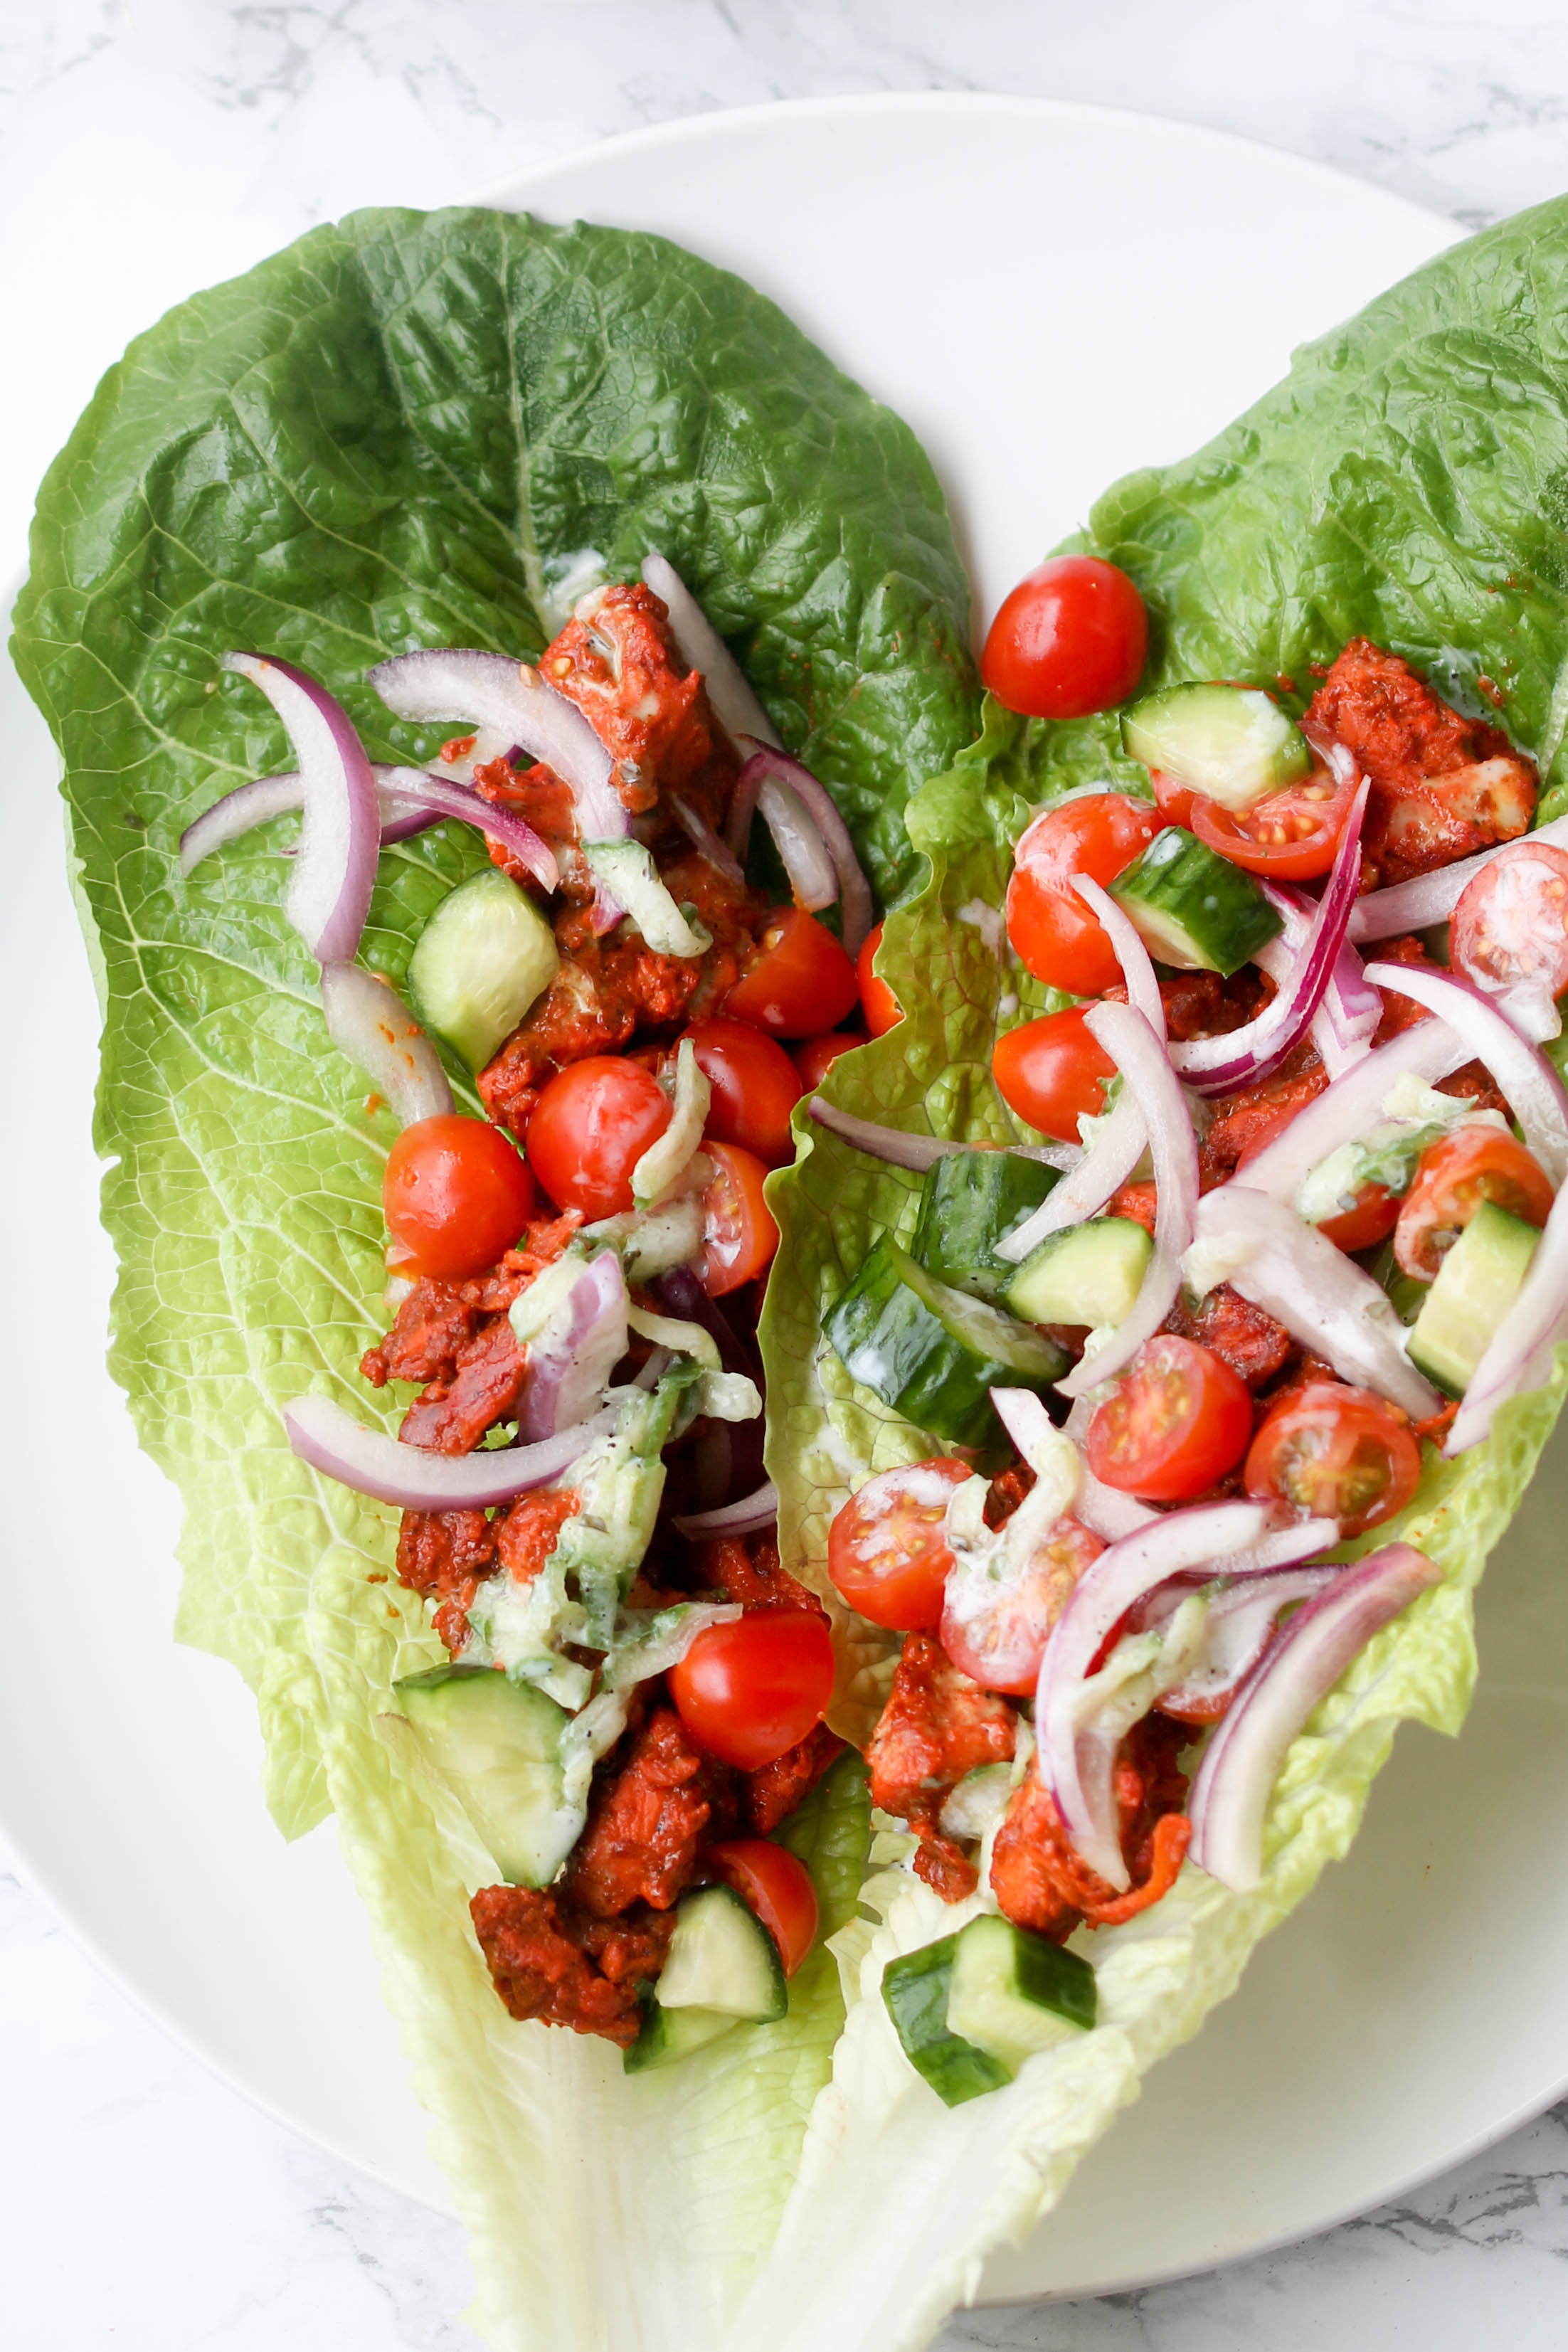 Chicken Tikka Lettuce Wrap is a family-friendly option for weeknight. It is super quick, delicious, and can be made ahead of time. Naturally gluten-free.